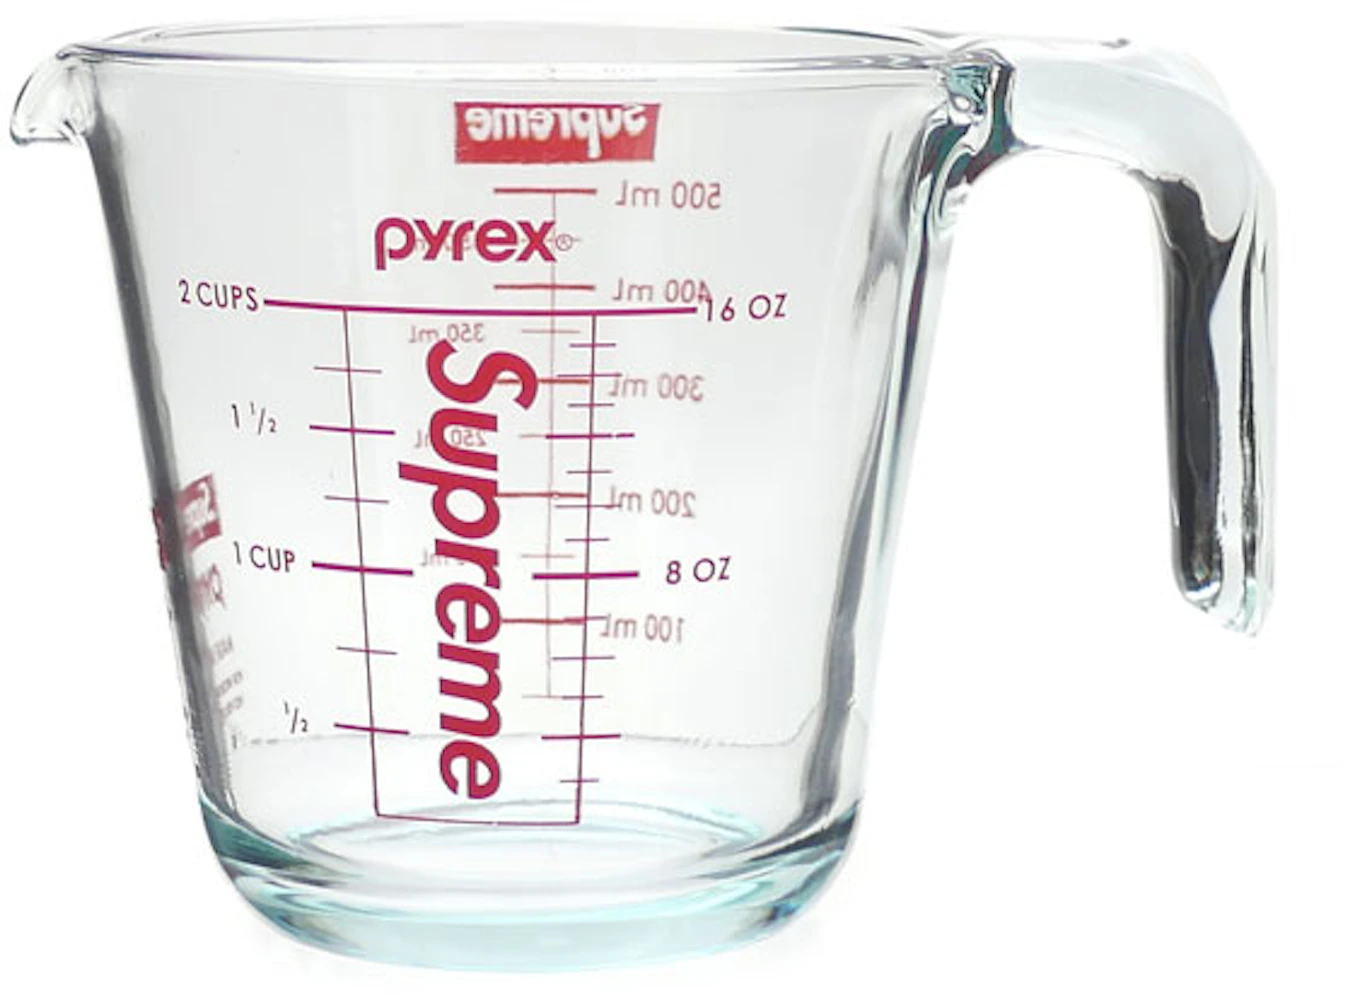 https://images.stockx.com/images/Supreme-Pyrex-2-Cup-Measuring-Cup-Clear.jpg?fit=fill&bg=FFFFFF&w=700&h=500&fm=webp&auto=compress&q=90&dpr=2&trim=color&updated_at=1606320616?height=78&width=78